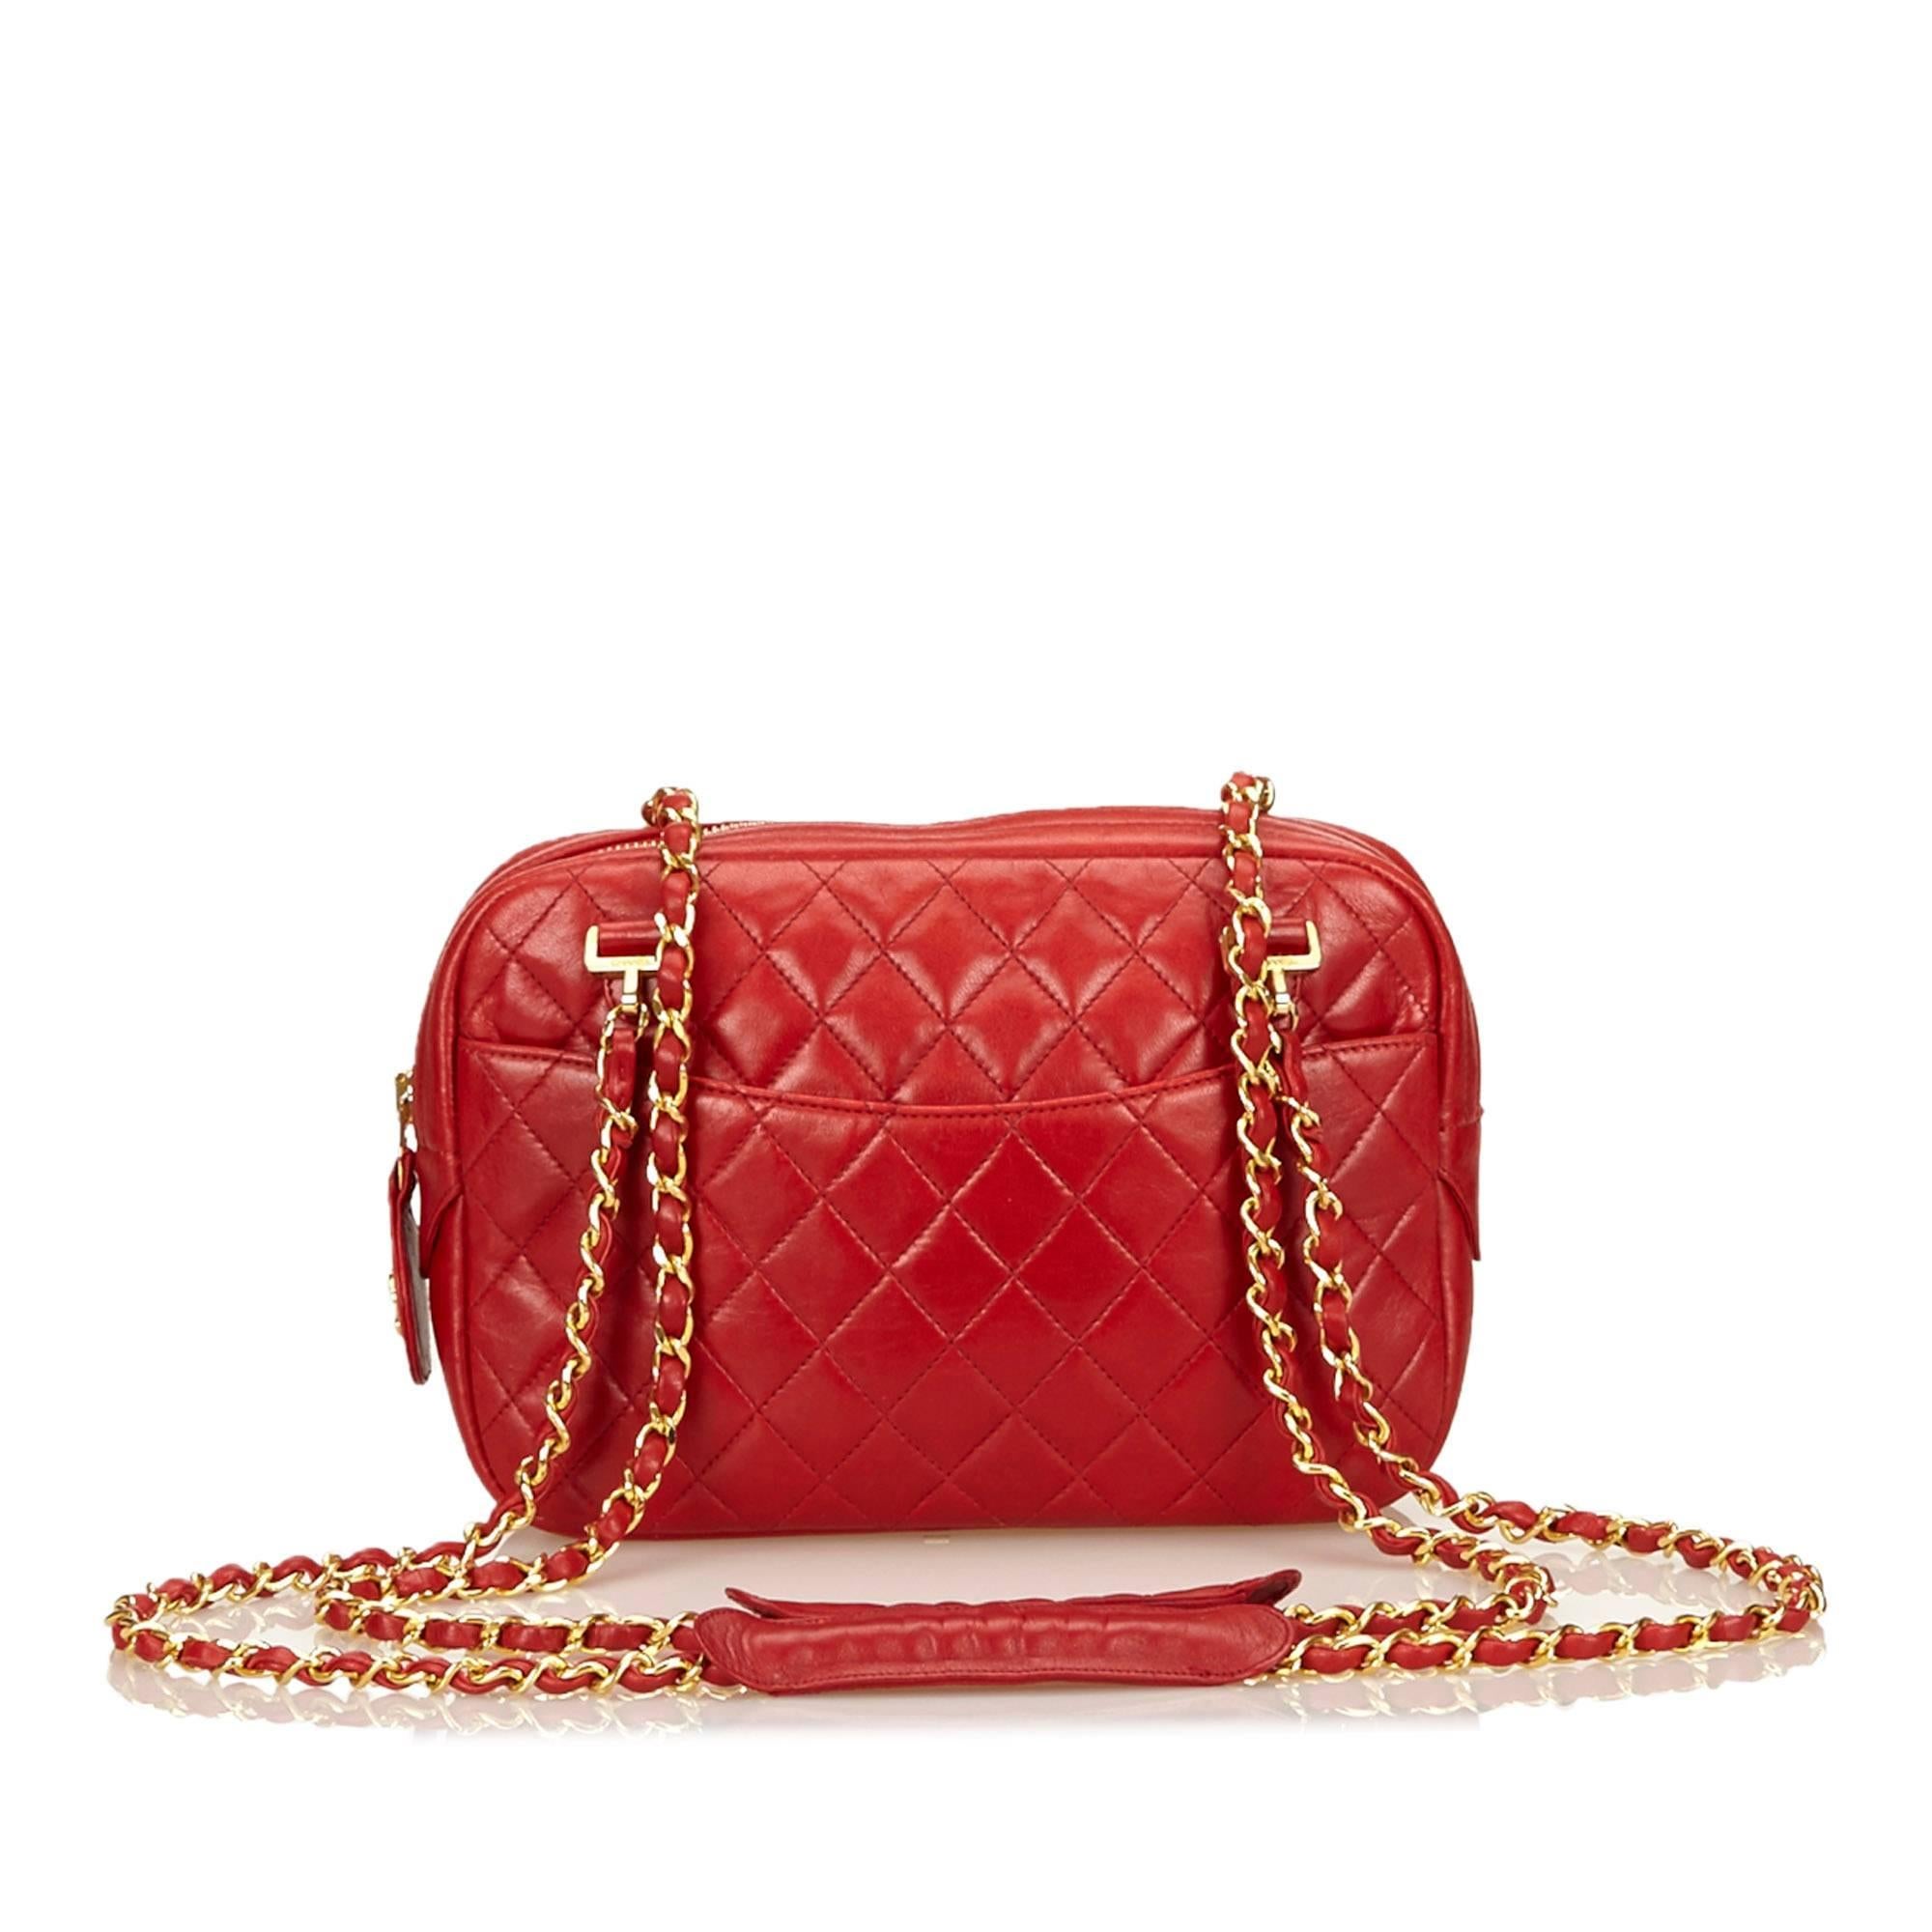 Product details:  Red quilted lambskin leather shoulder bag by Chanel.  Dual woven leather chain shoulder straps.  Top zip closure.  Lined interior with inner slide and zip pockets.  Front and back exterior slide pockets.  Goldtone hardware. 